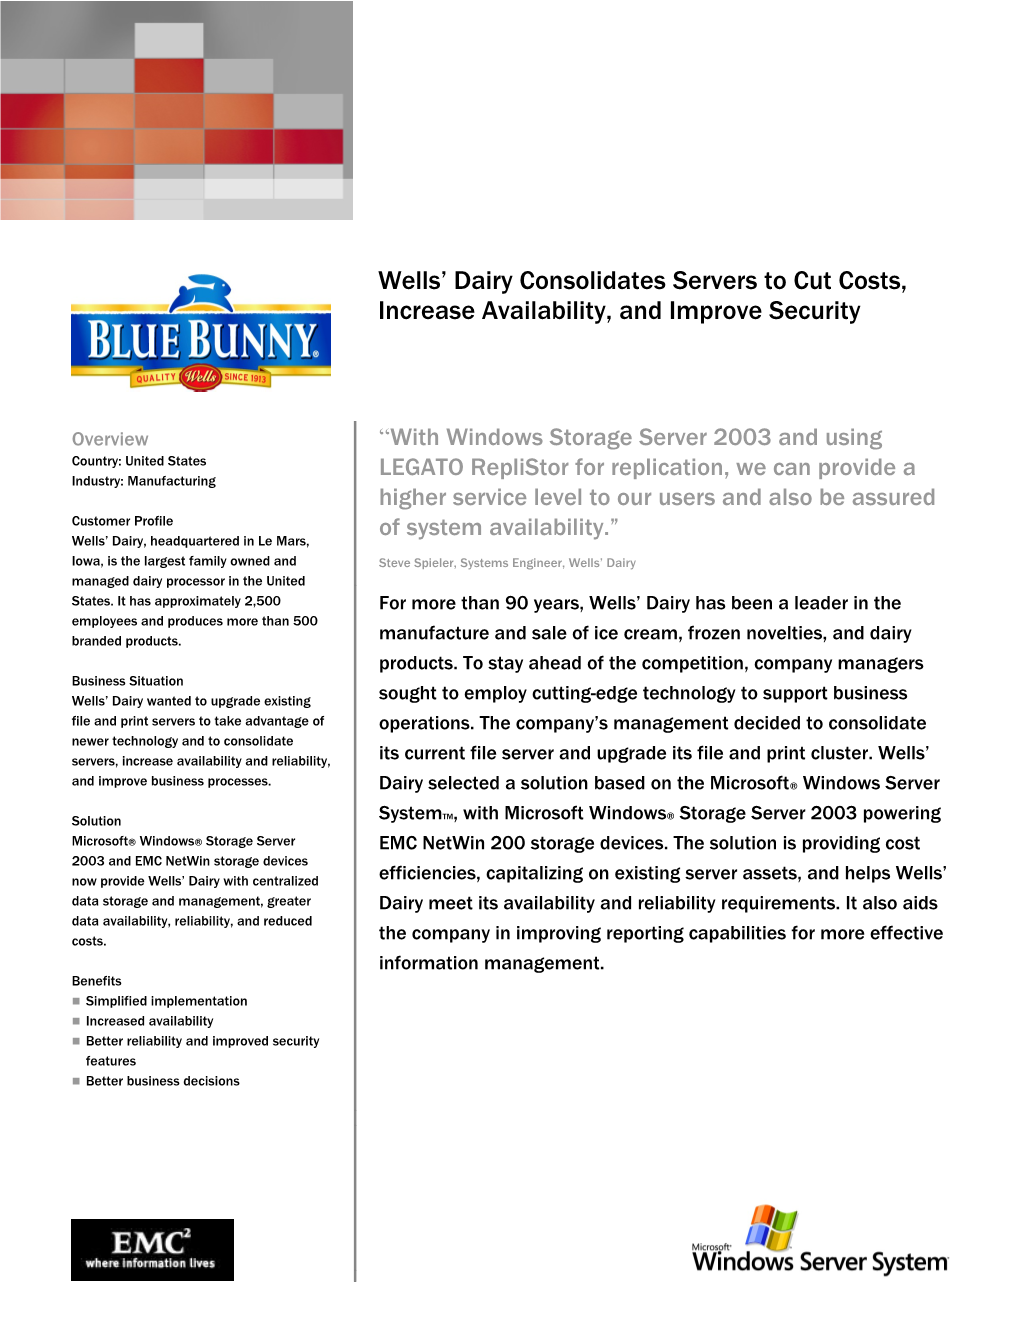 Wells Dairy Consolidates Servers to Cut Costs, Increase Availability, and Improve Security